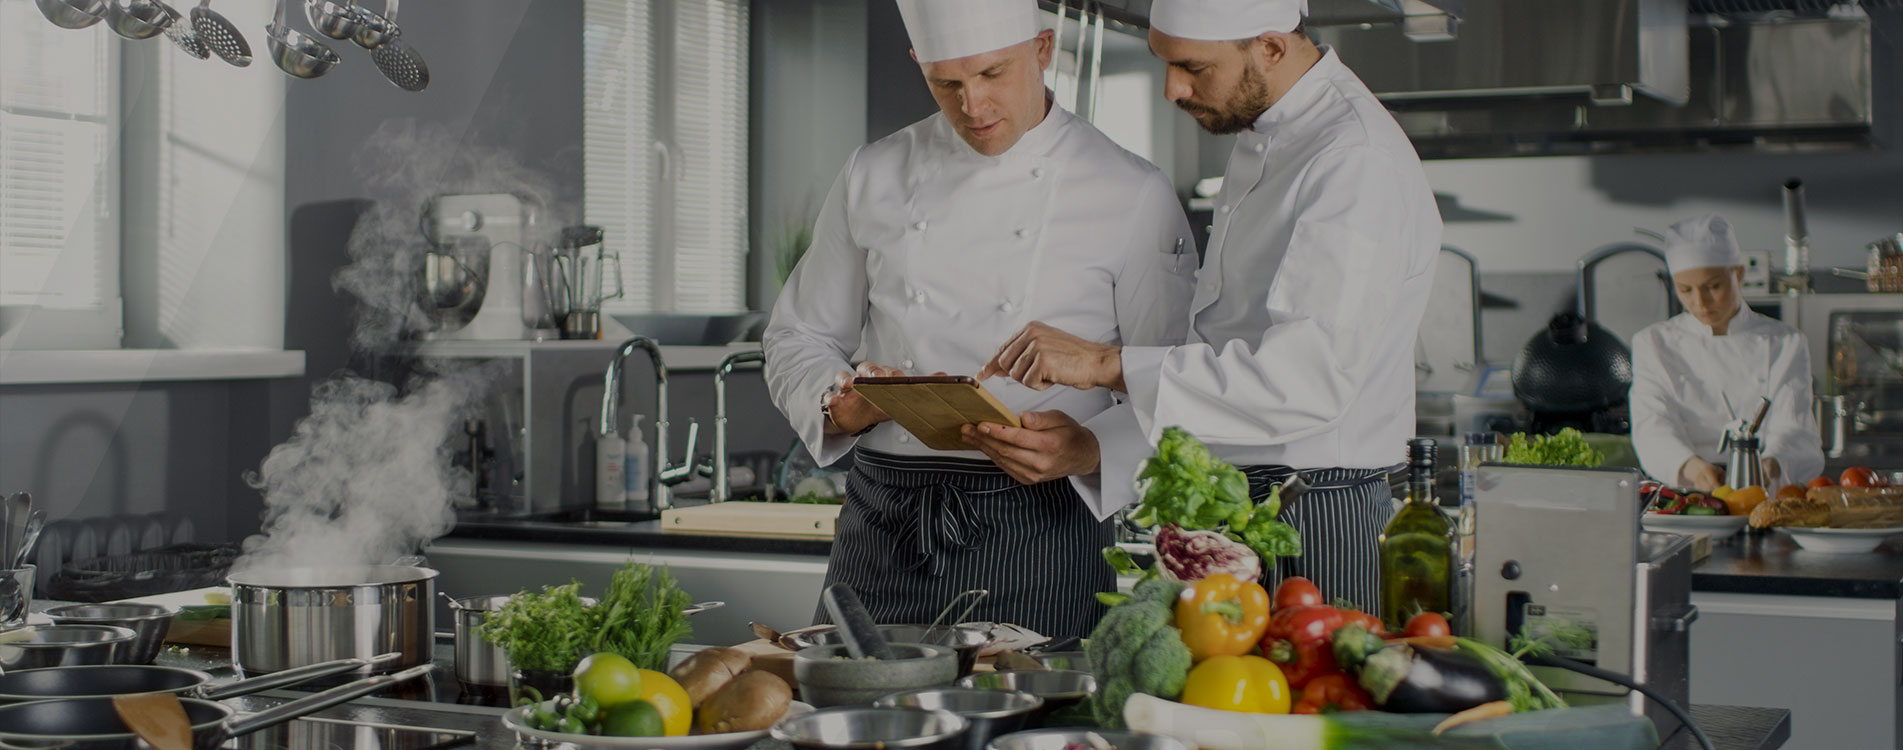  A Leading Manufacturer in Commercial Kitchen Equipment